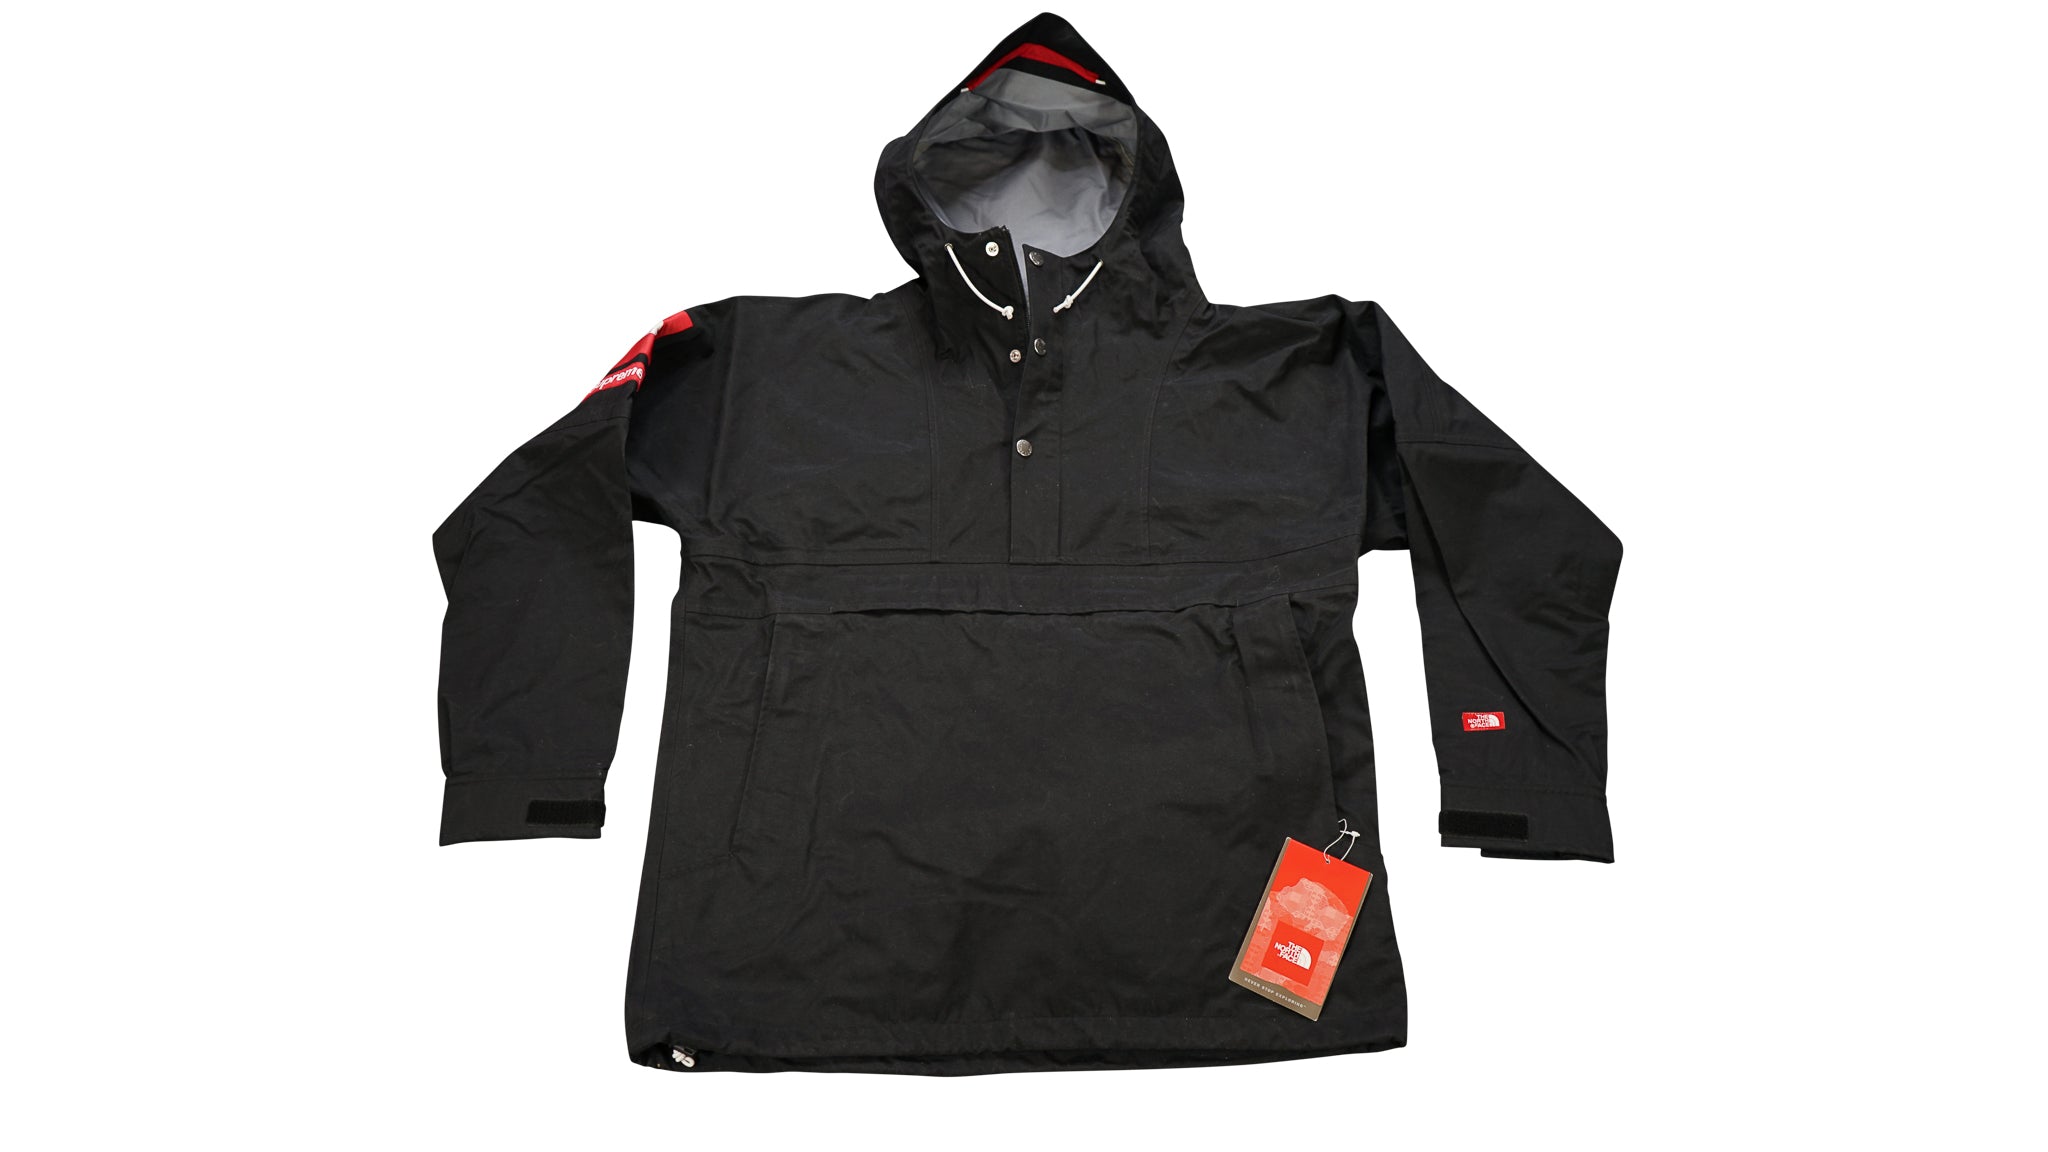 SS10 Supreme x The North Face 